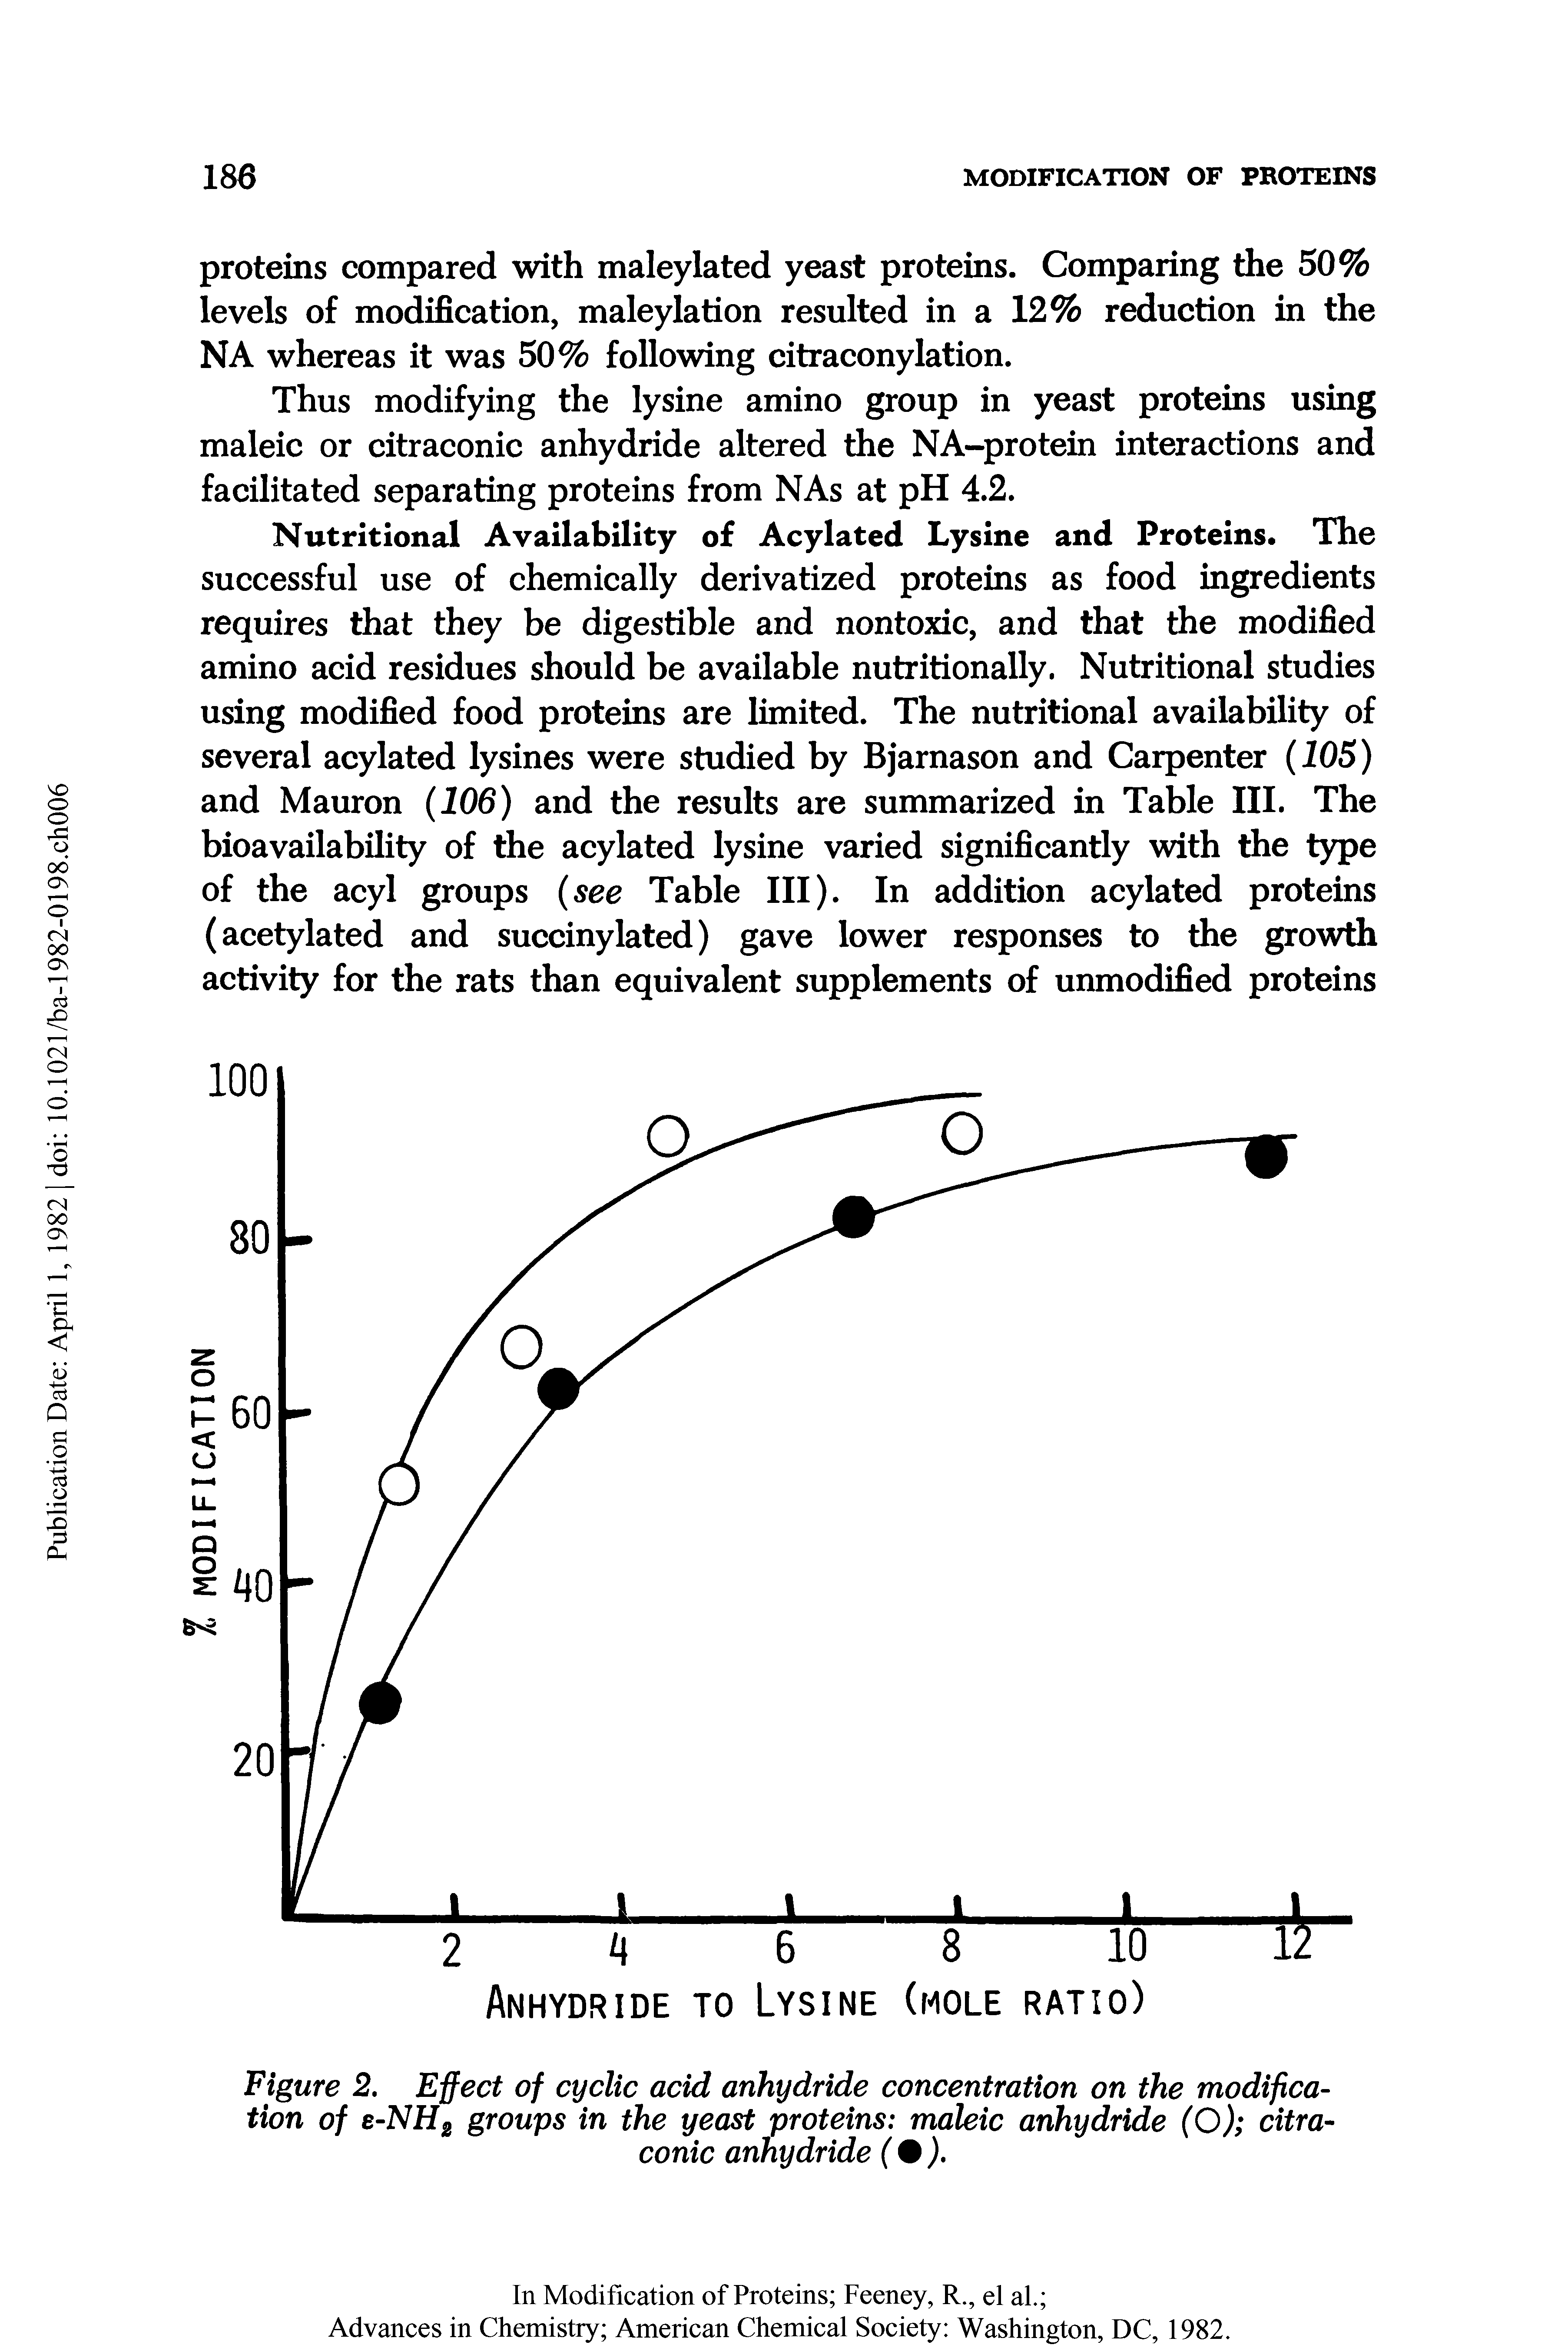 Figure 2. Effect of cyclic acid anhydride concentration on the modification of e-NH2 groups in the yeast proteins maleic anhydride (O) citraconic anhydride (%).